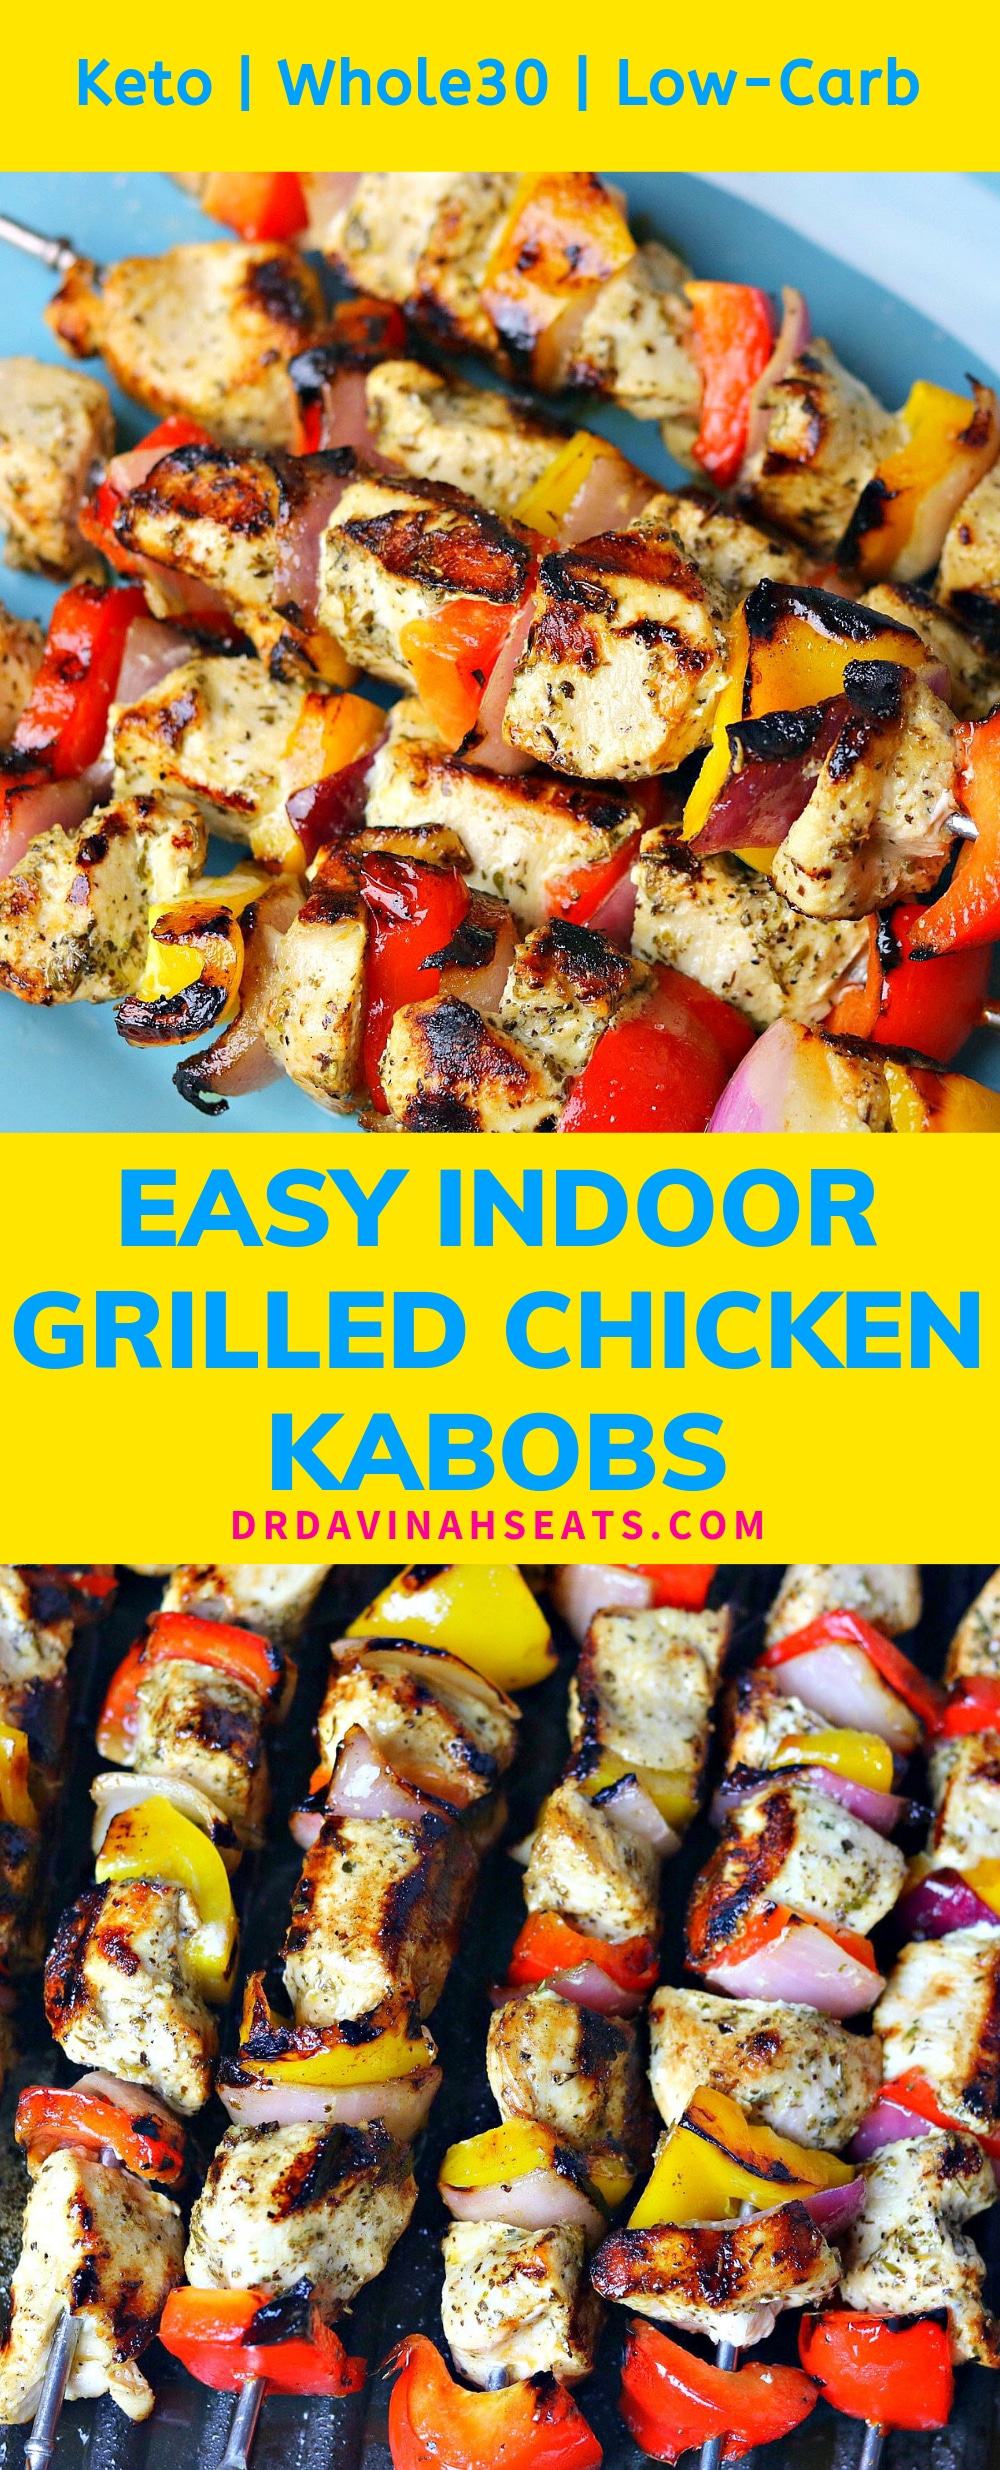 A Pinterest image for easy grilled chicken kabobs